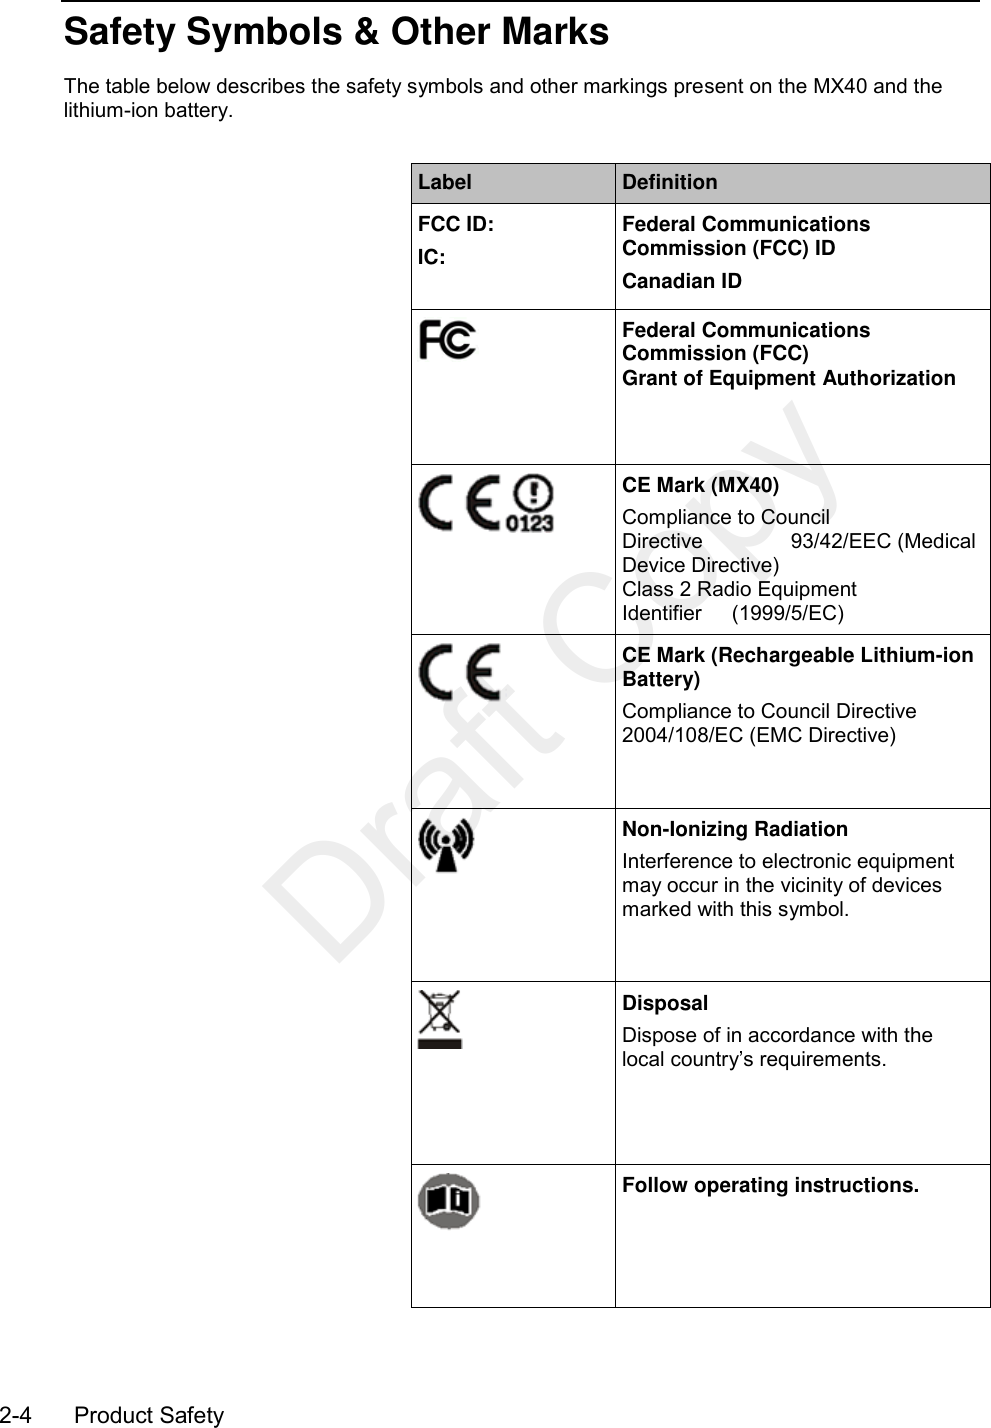    2-4    Product Safety  Safety Symbols &amp; Other Marks The table below describes the safety symbols and other markings present on the MX40 and the lithium-ion battery.  Label Definition FCC ID: IC: Federal Communications Commission (FCC) ID Canadian ID  Federal Communications Commission (FCC)   Grant of Equipment Authorization  CE Mark (MX40) Compliance to Council Directive                93/42/EEC (Medical Device Directive) Class 2 Radio Equipment Identifier     (1999/5/EC)  CE Mark (Rechargeable Lithium-ion Battery) Compliance to Council Directive 2004/108/EC (EMC Directive)   Non-Ionizing Radiation Interference to electronic equipment may occur in the vicinity of devices marked with this symbol.  Disposal Dispose of in accordance with the local country’s requirements.  Follow operating instructions. Draft Copy